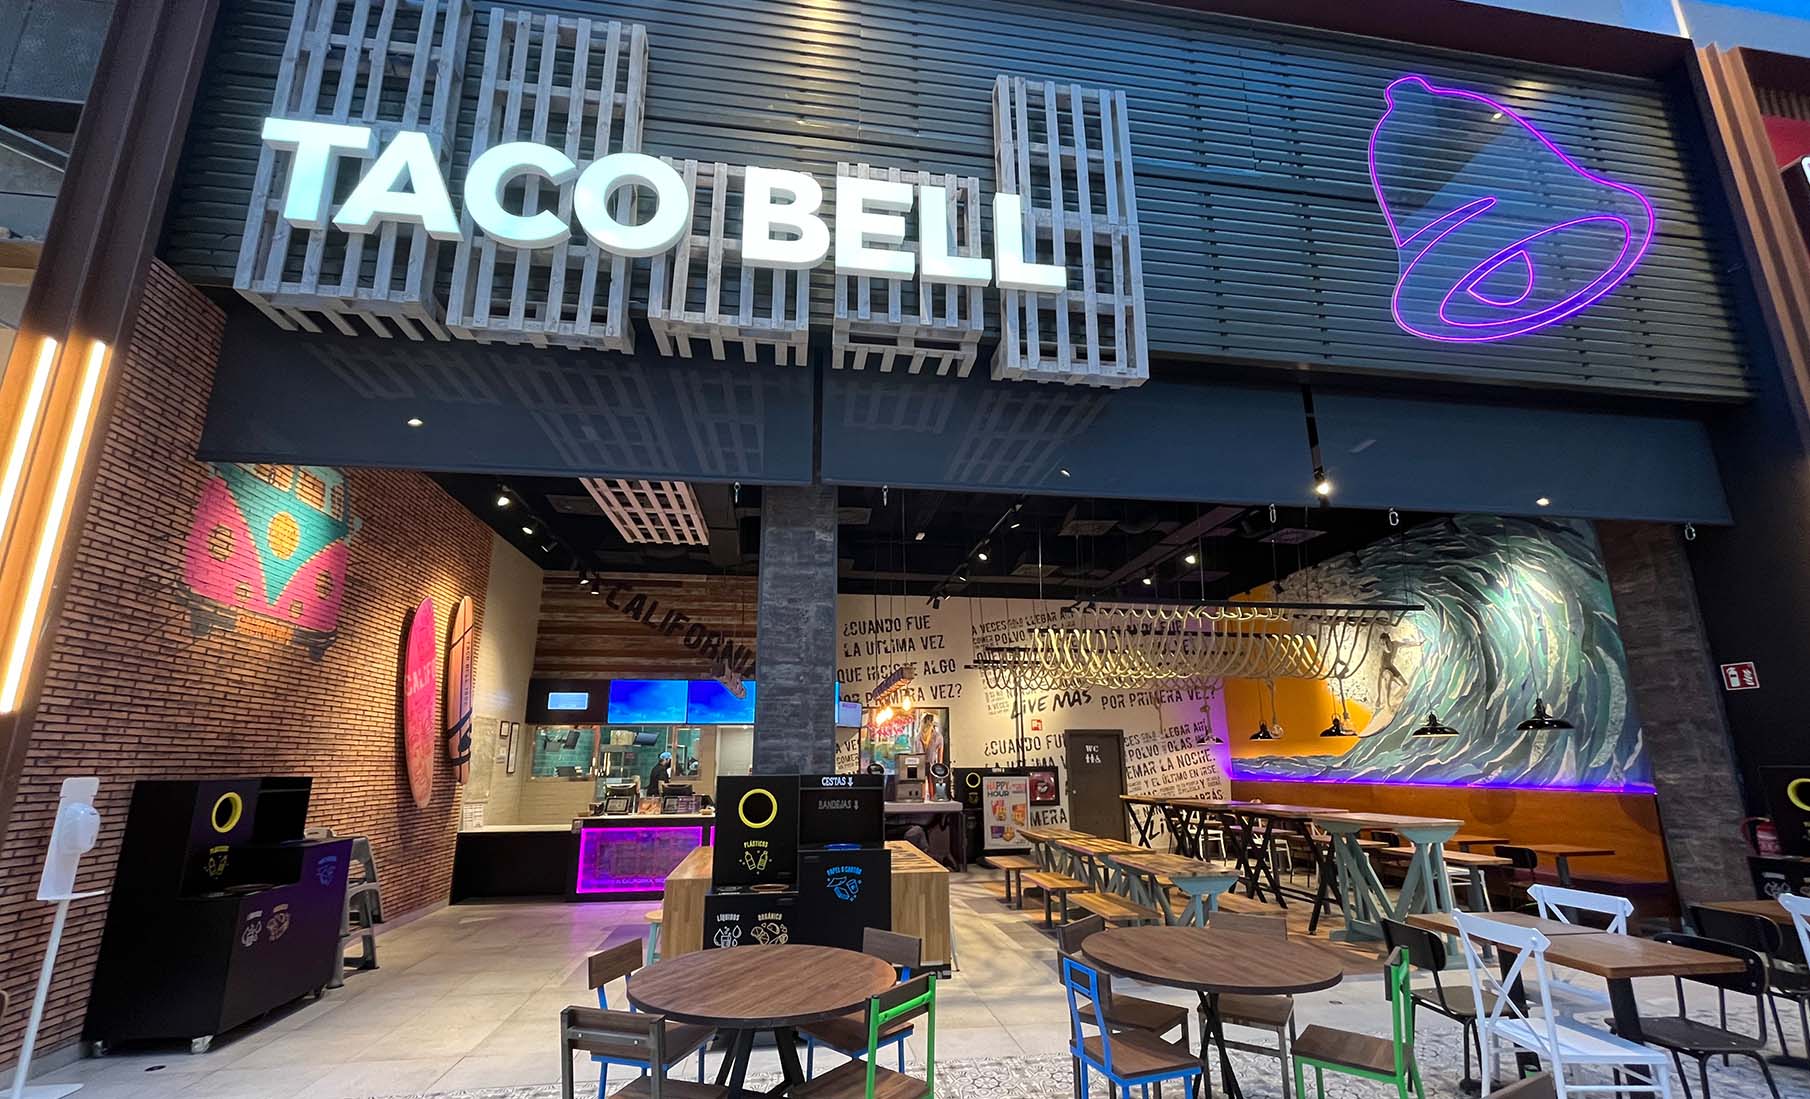 Taco Bell® Celebrates Más International Expansion and Spain Reaches Its 100th Restaurant 